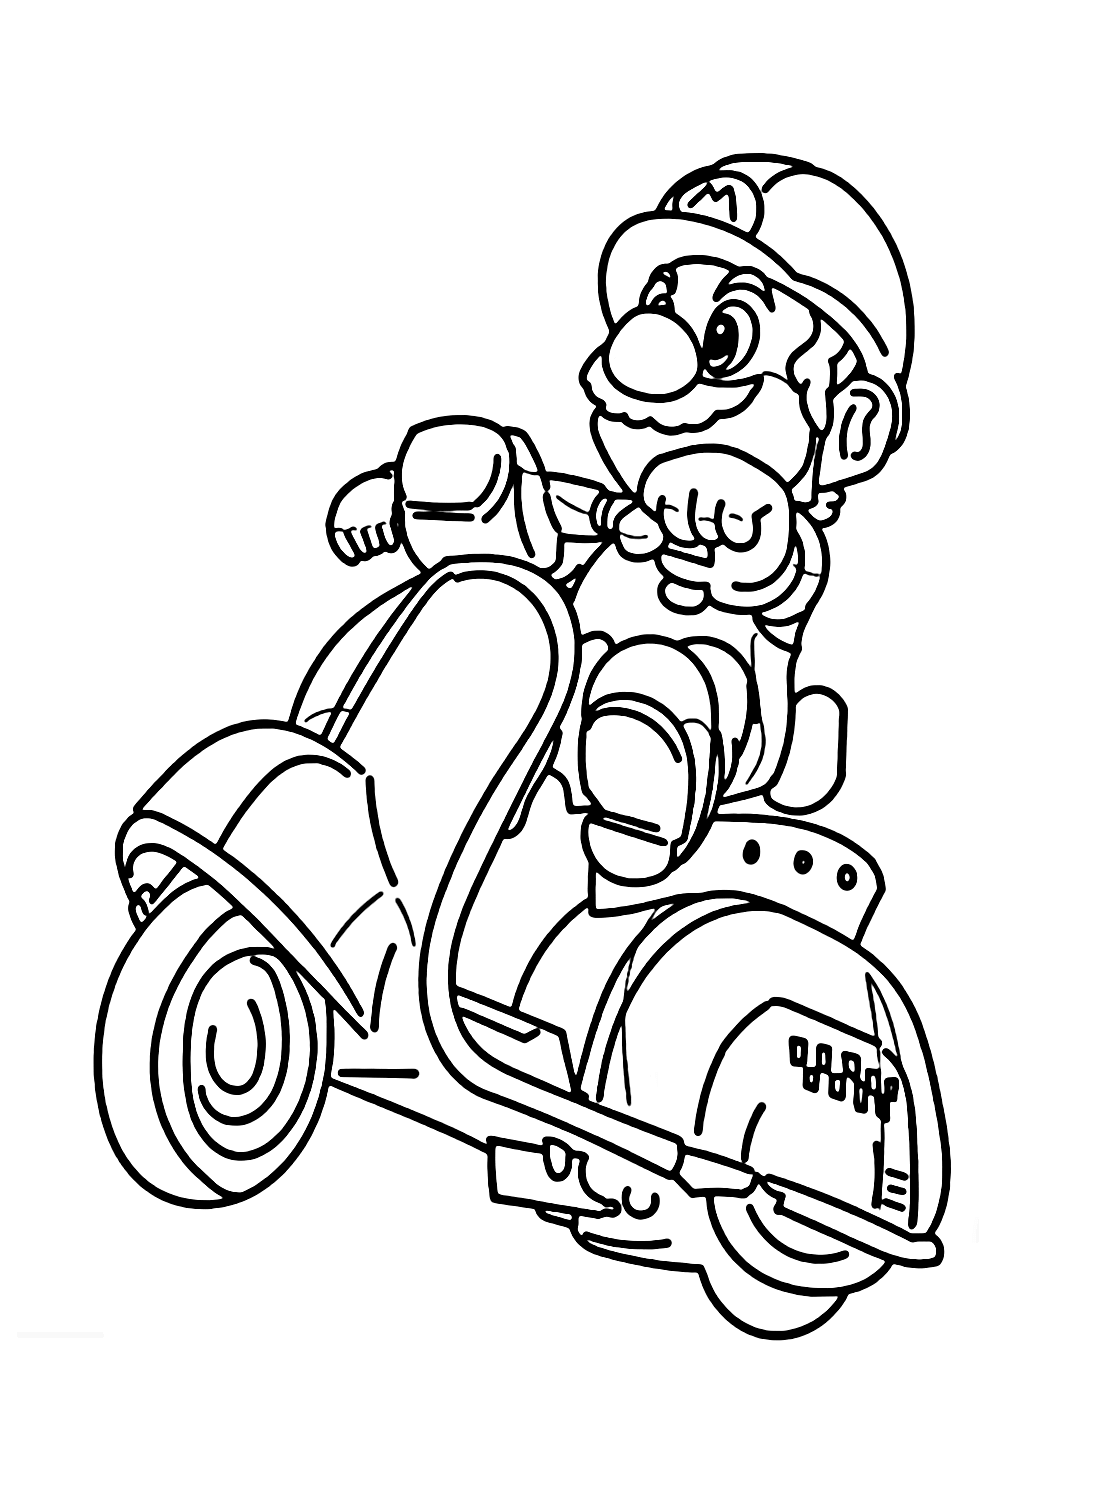 Mario on a Motorbike Coloring Pages